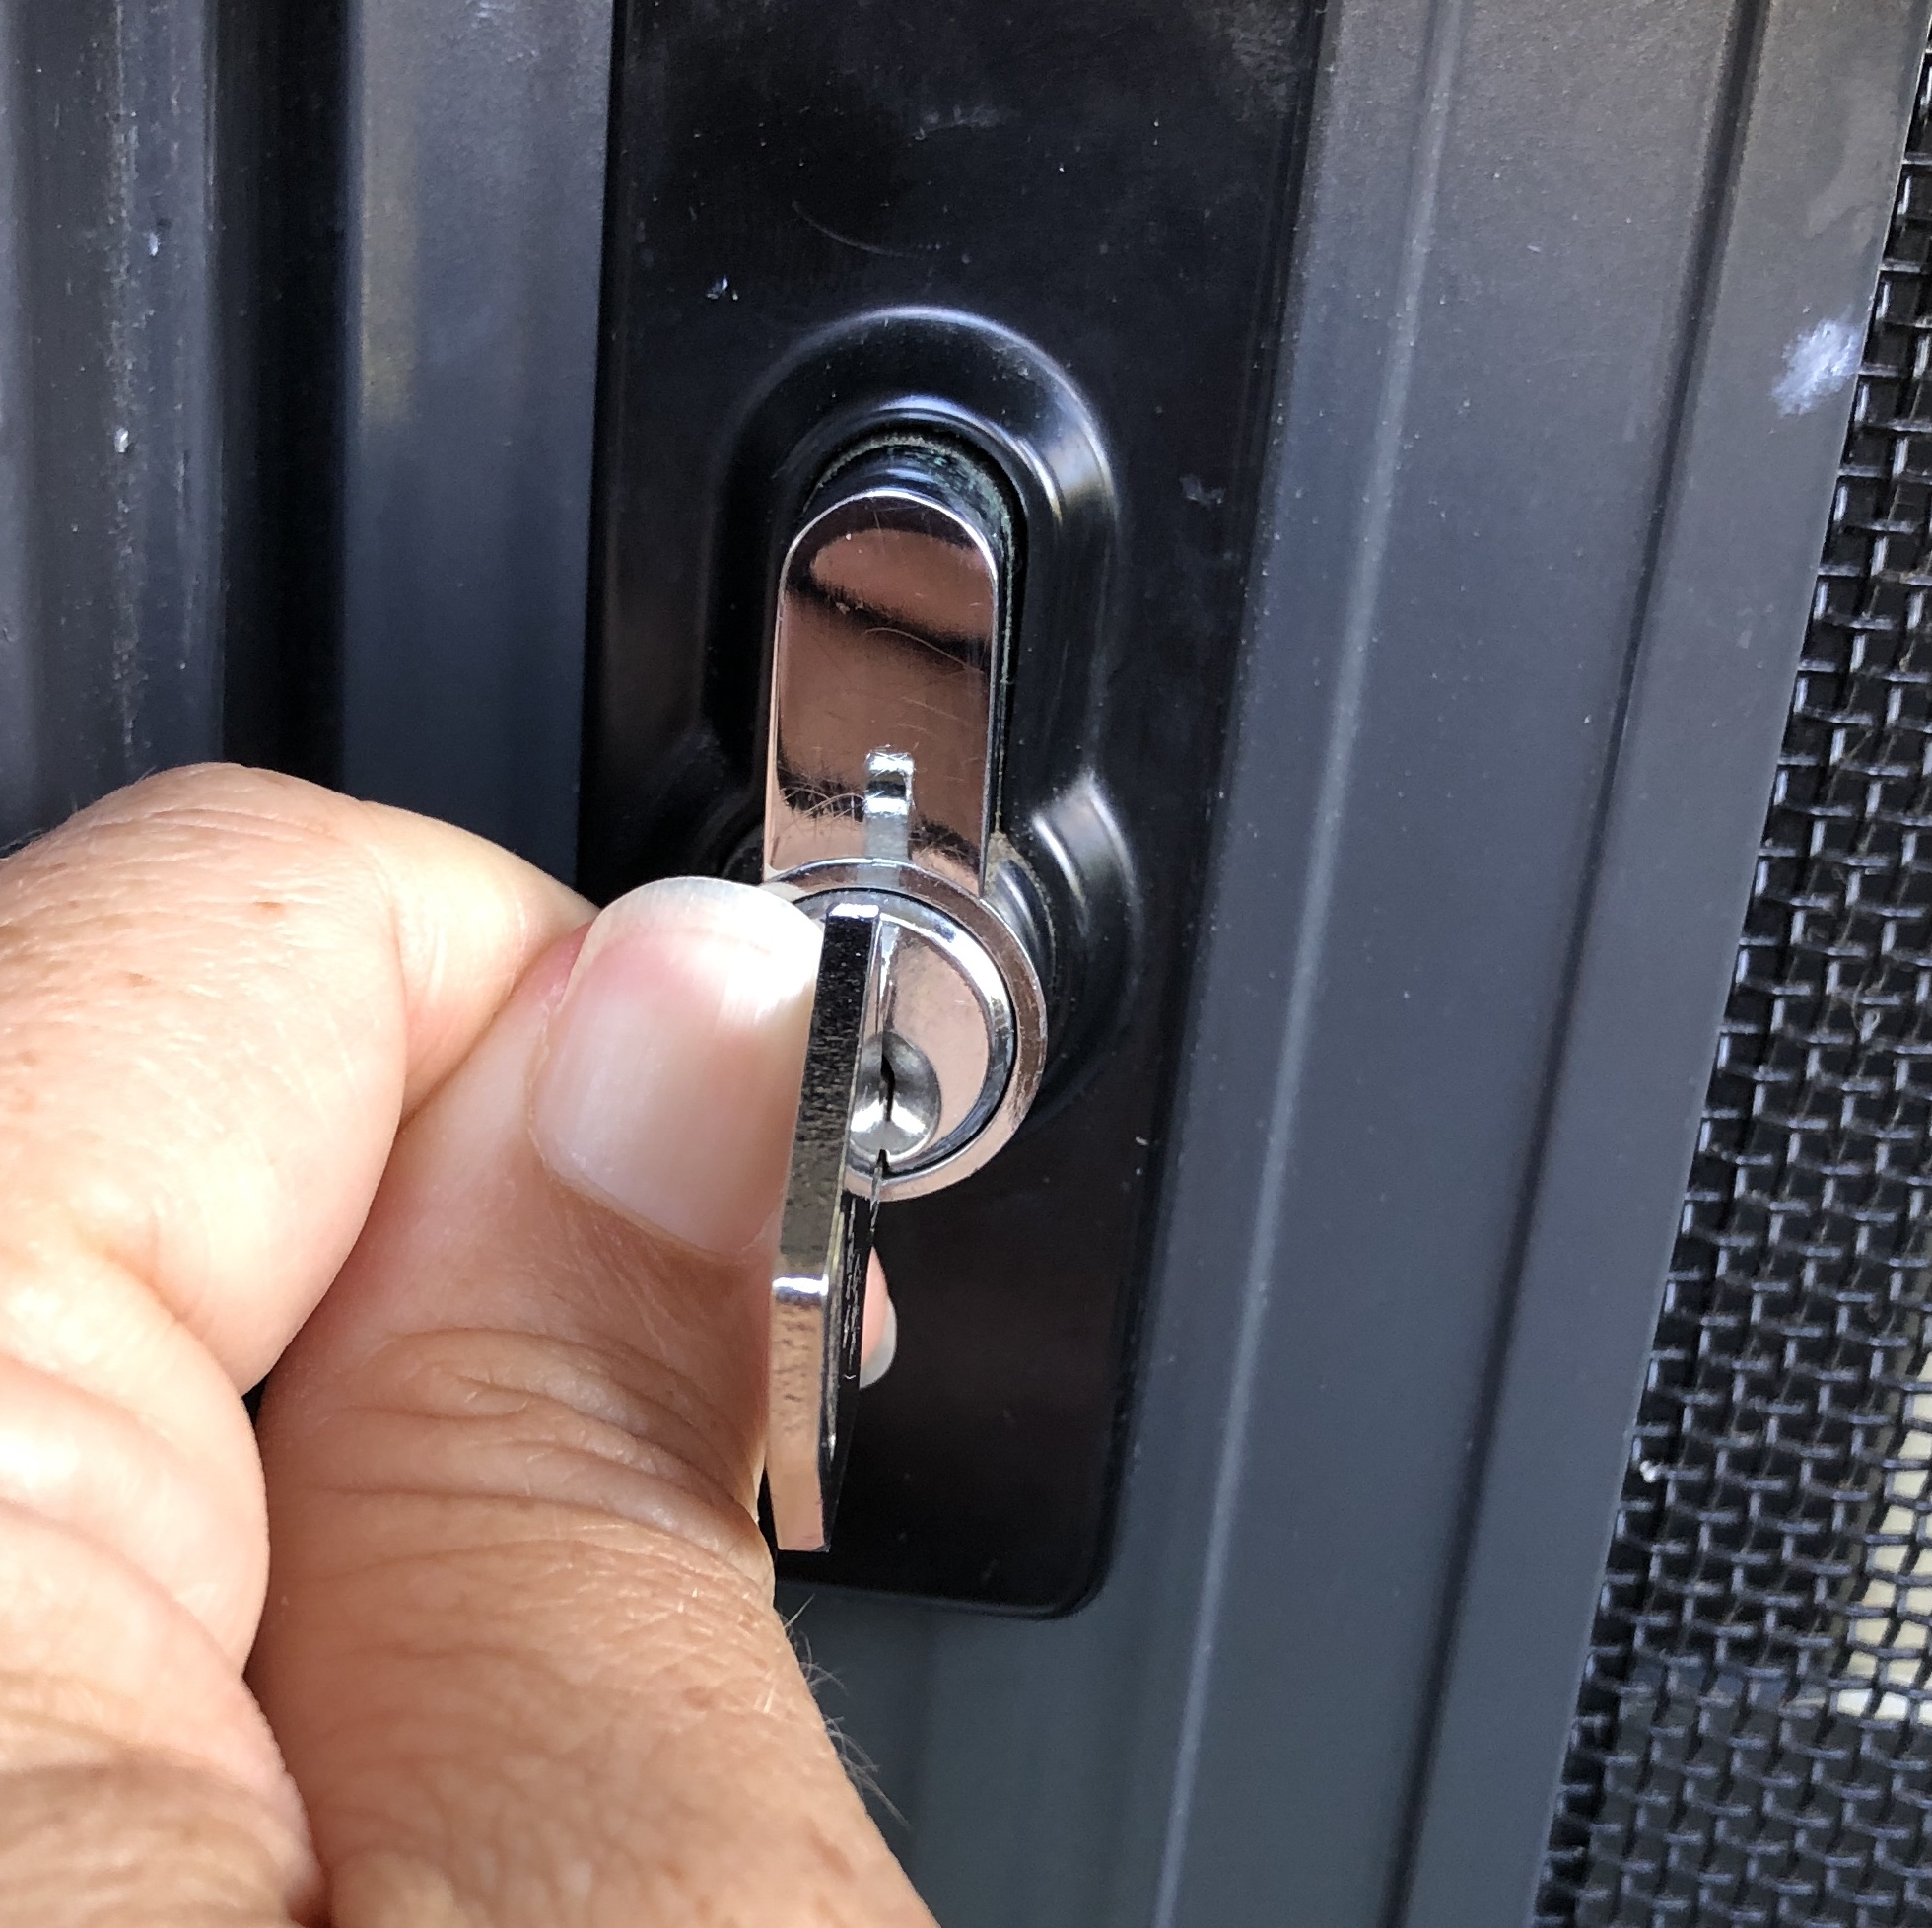 How to Unstick a Door Lock (And How to Keep It That Way for Good)